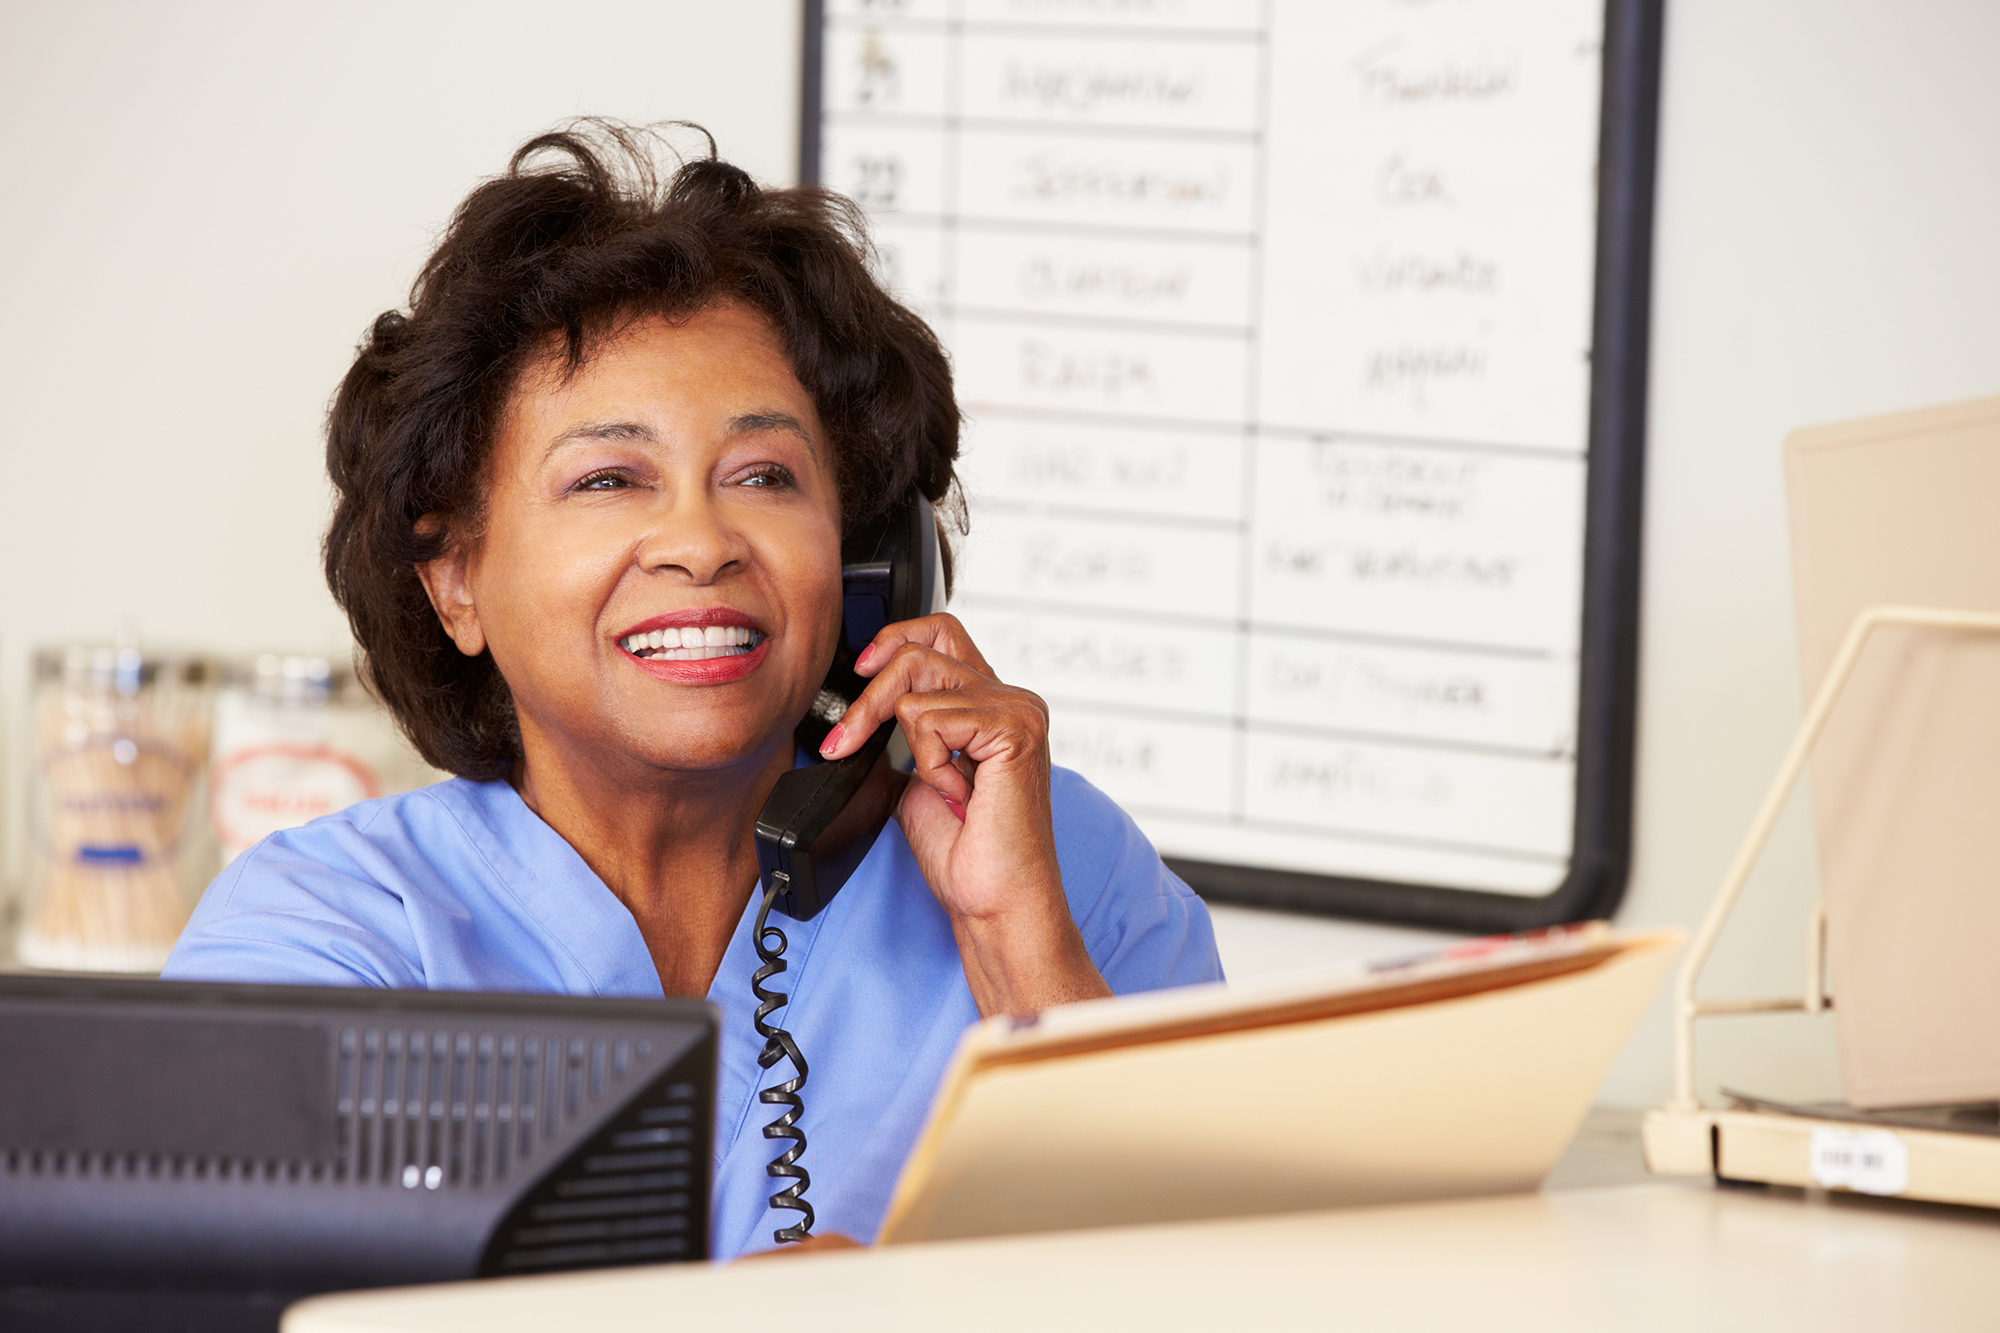 Telephone triage nurse courses and care navigator training by Telelearning